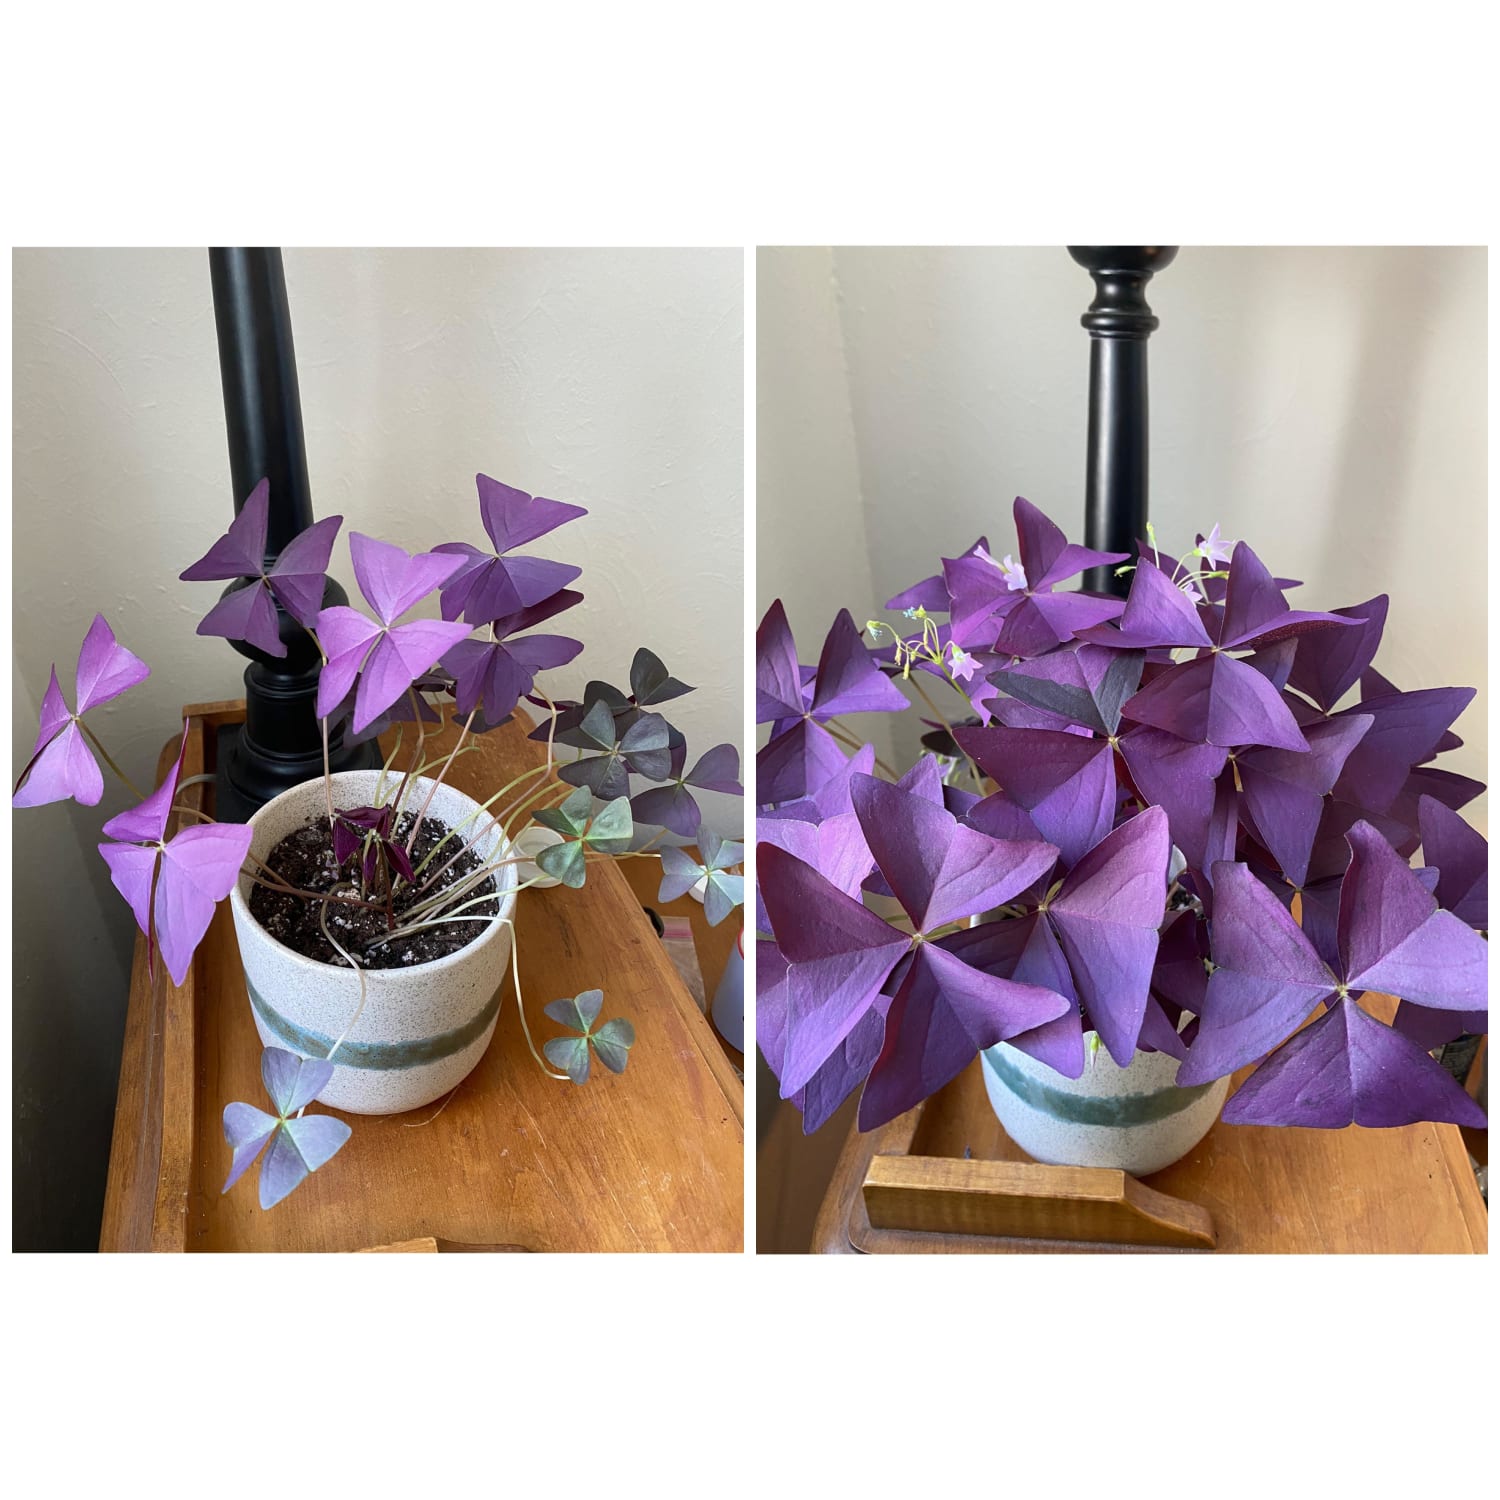 Oxalis growth, June 17th-August 17th. So pleased!!